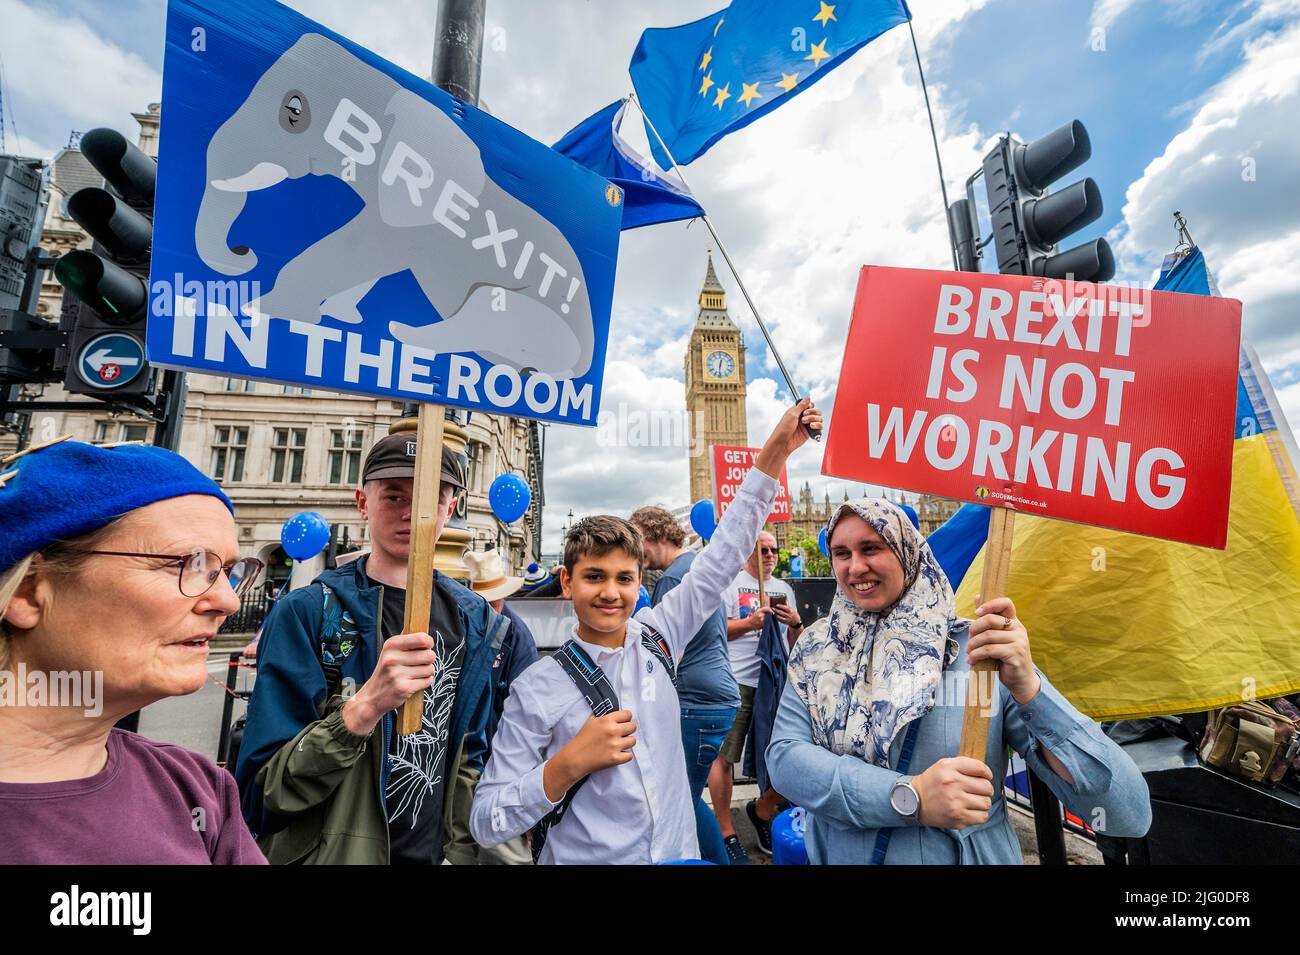 London, UK. 6th July, 2022. Protest (led by Steve Bray and SODEM) against Prime Minister Boris Johnson, while he is in Parliament for Prime Minister's Questions. They believe he and his government are 'corrupt and liars'. Credit: Guy Bell/Alamy Live News Stock Photo